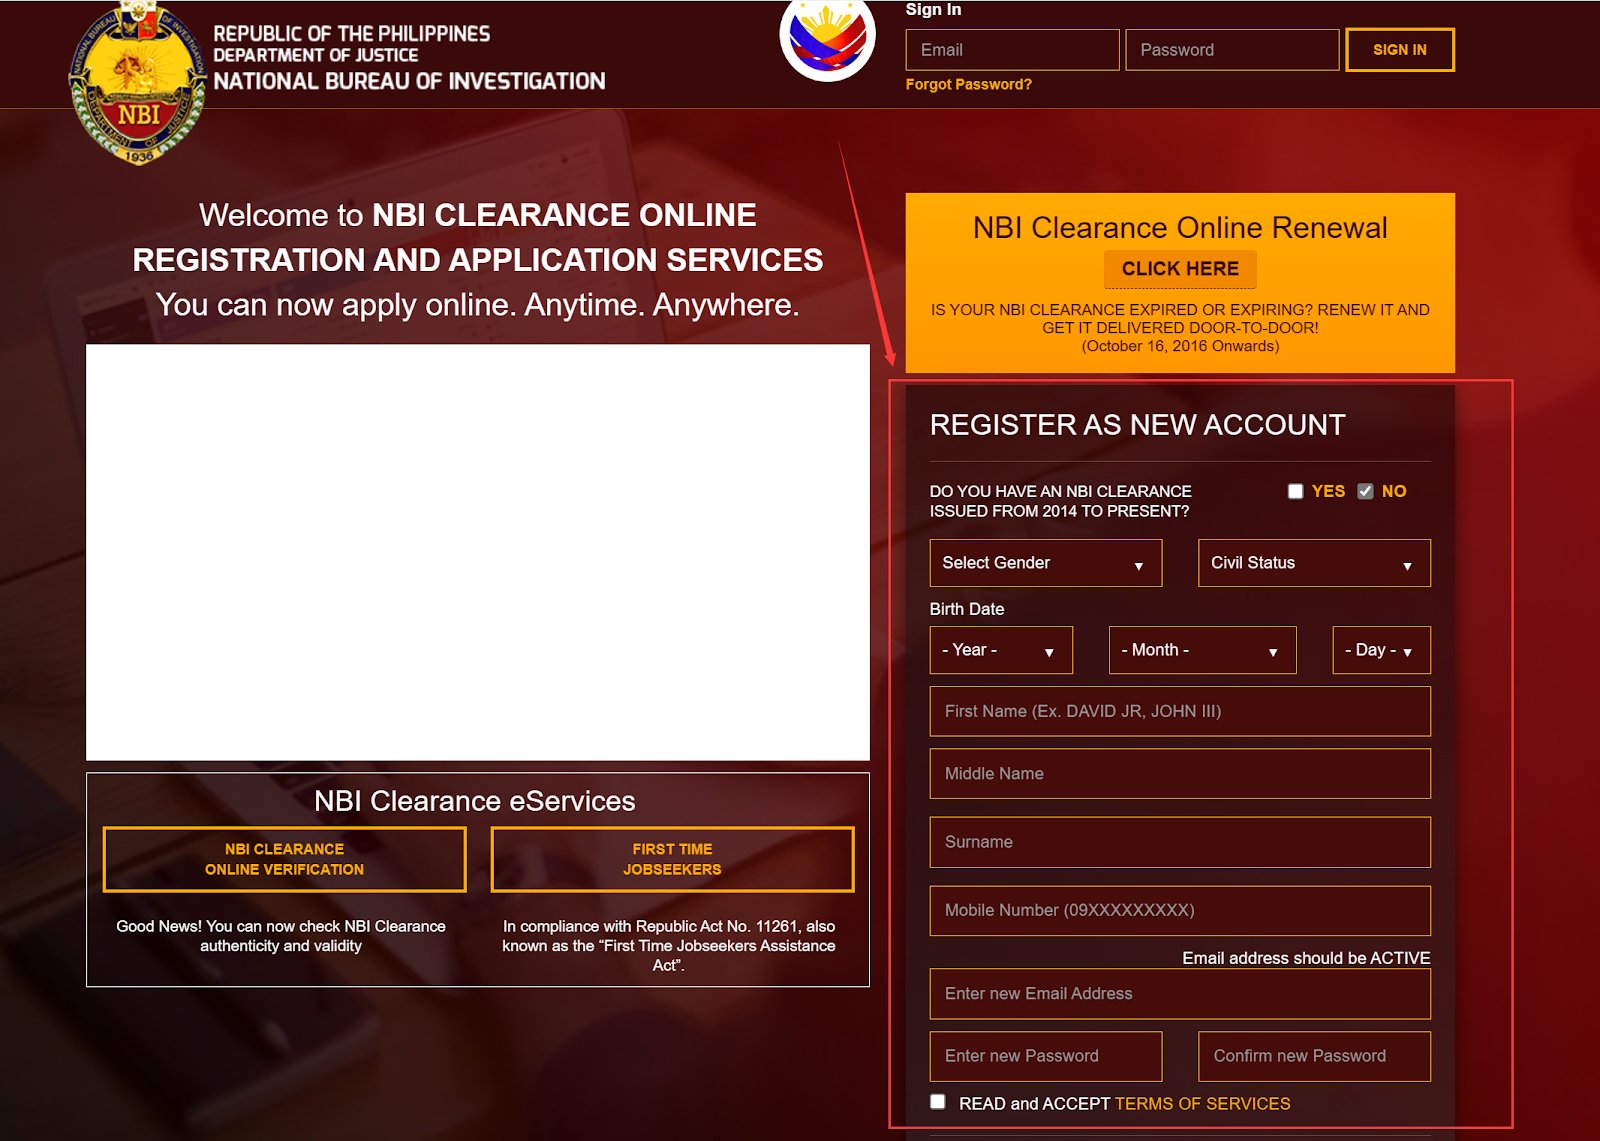 NBI Clearance Services website